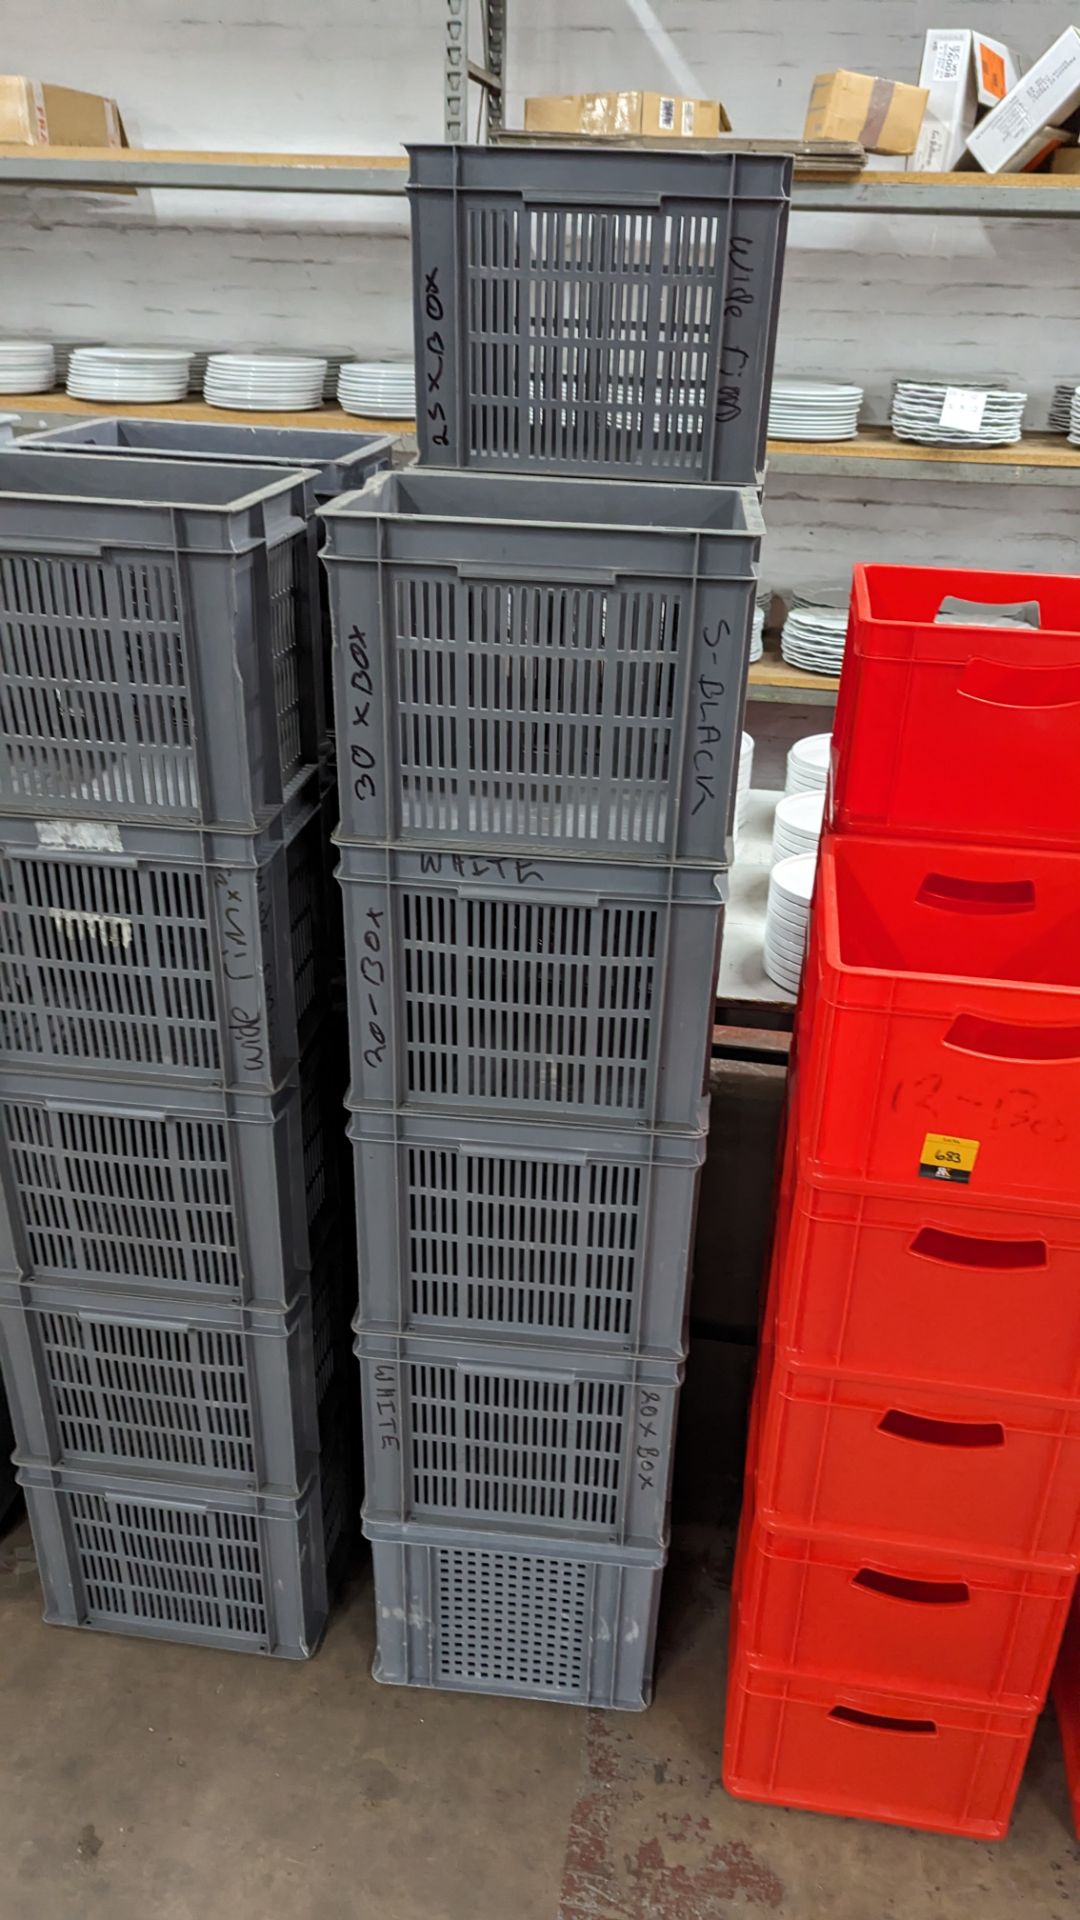 21 off grey plastic crates each measuring 400mm x 300mm x 300mm - Image 5 of 5